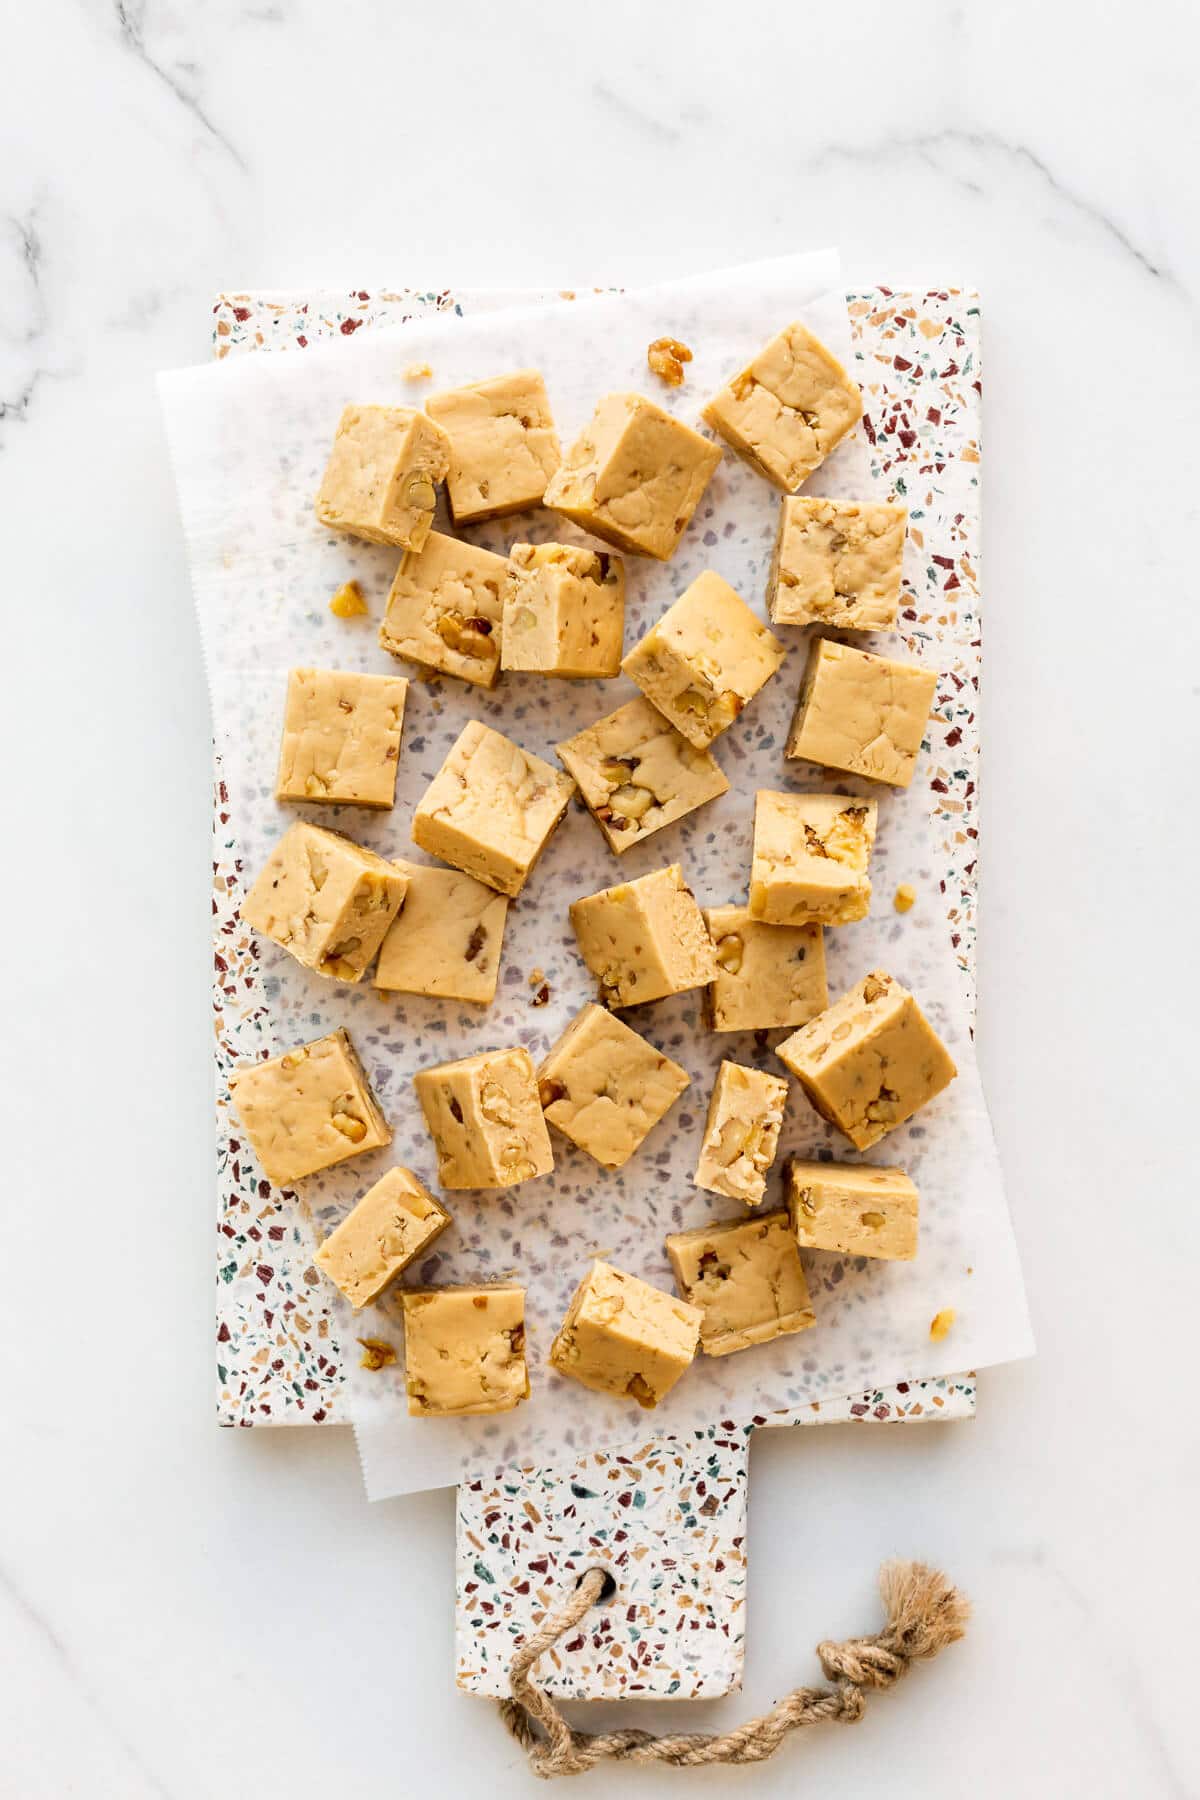 Maple fudge with walnuts, cut into squares, on a platter.